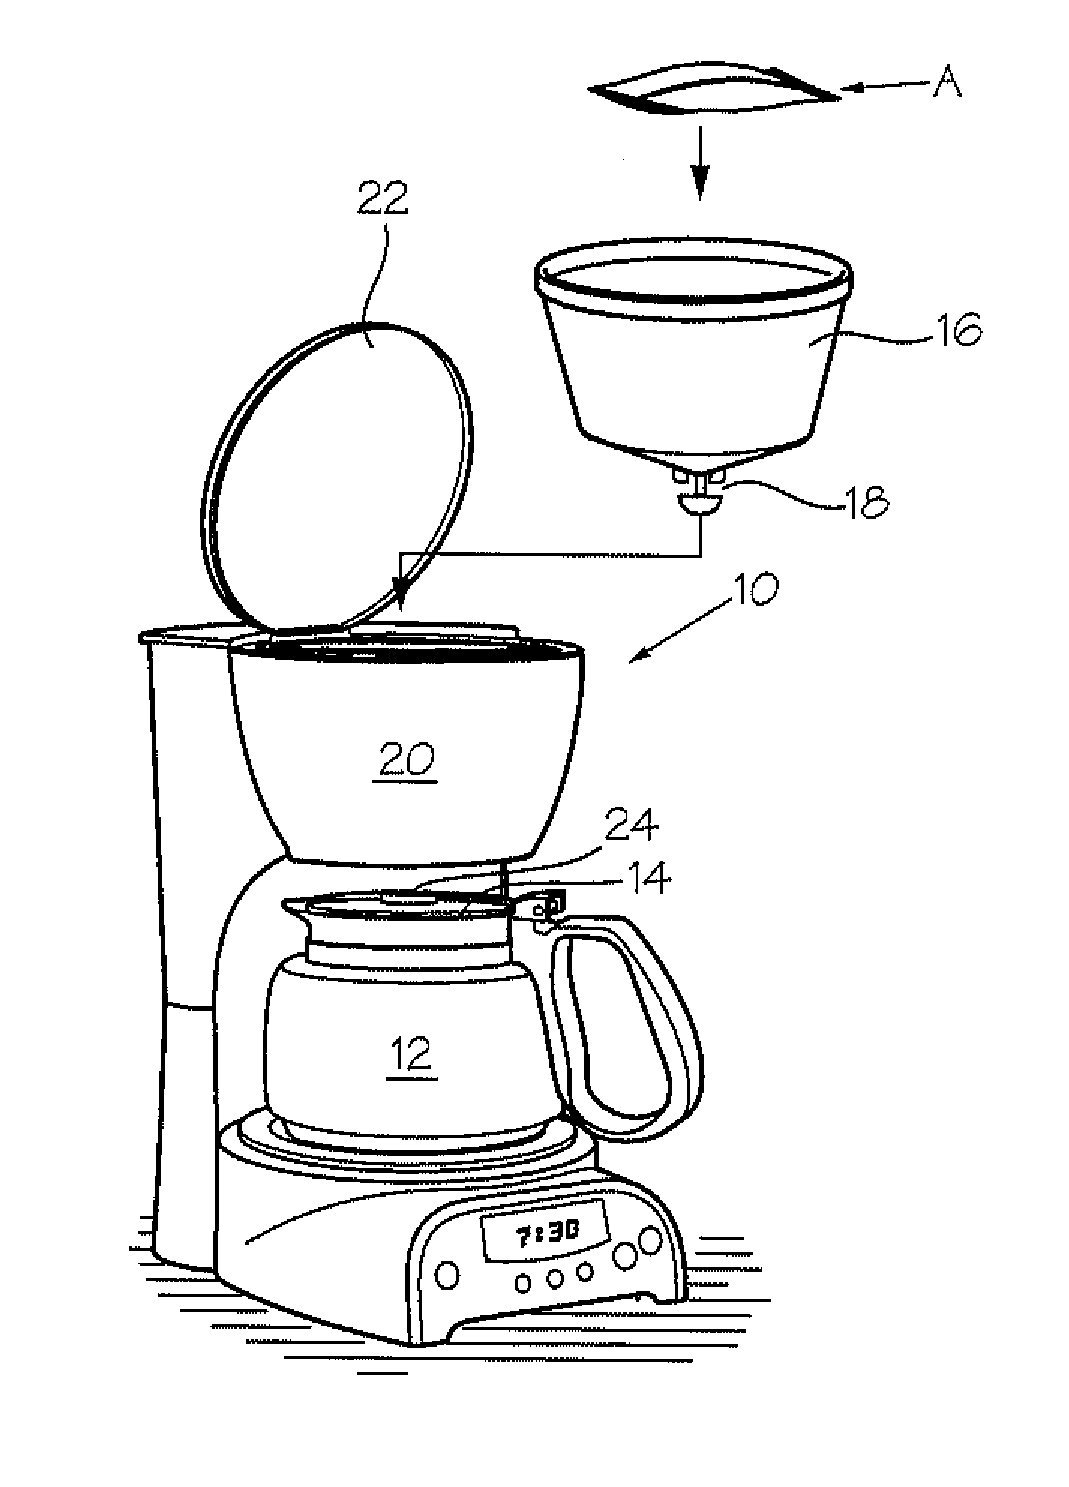 Domestic Sweet Tea Brewing Product and Process